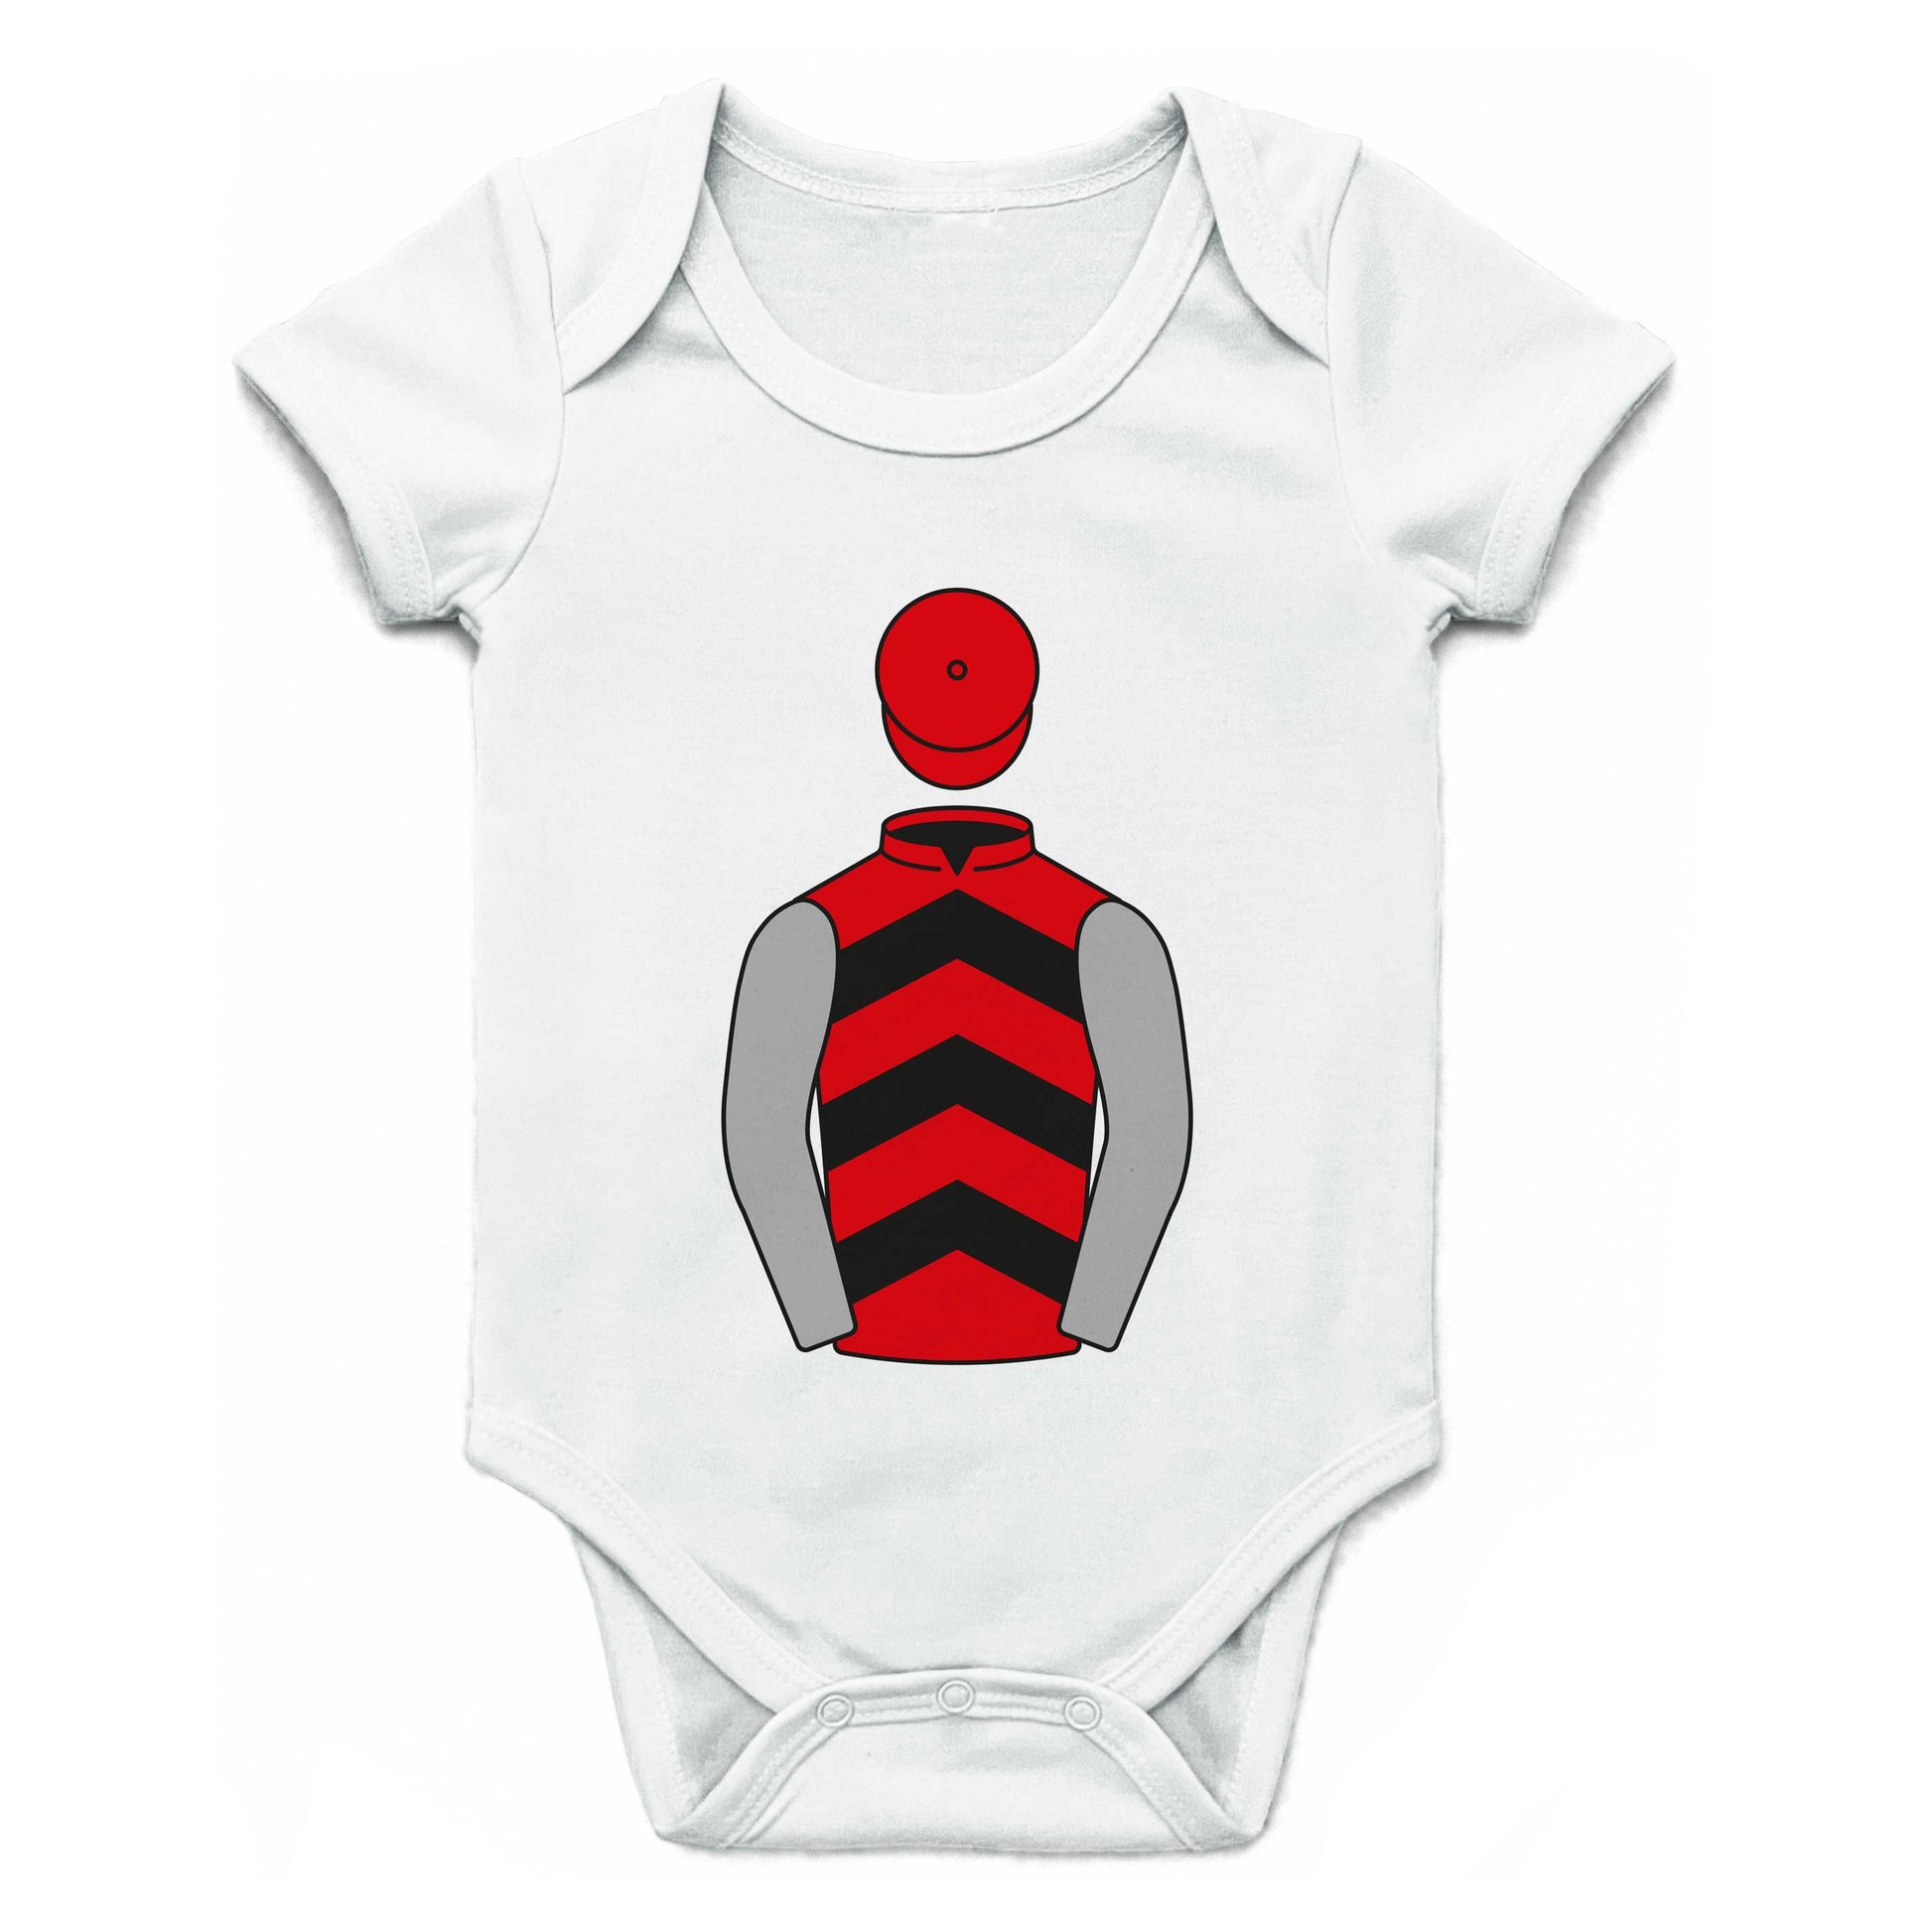 Drew And Ailsa Russell Single Silks Baby Grow - Baby Grow - Hacked Up